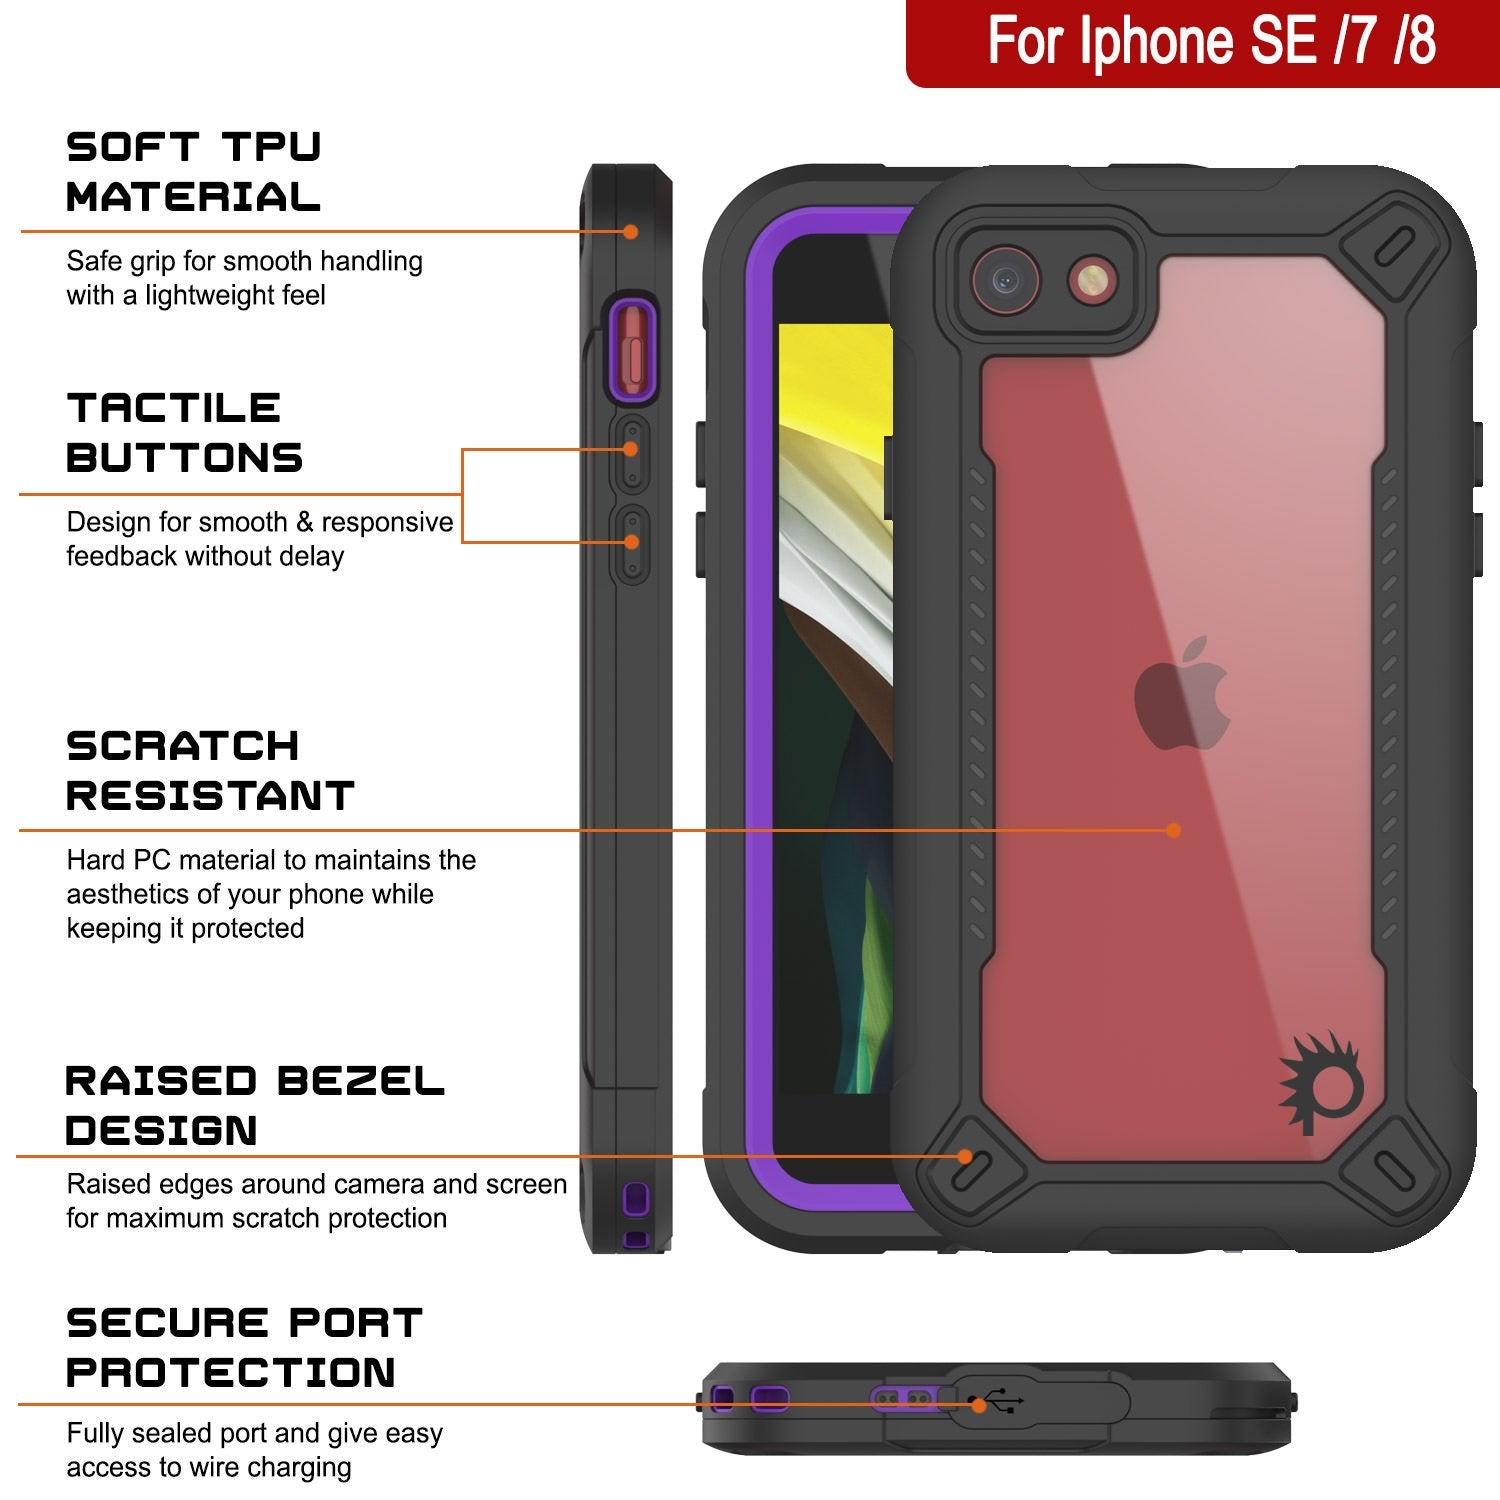 iPhone SE (4.7") Waterproof IP68 Case, Punkcase [Purple]  [Maximus Series] [Slim Fit] [IP68 Certified] [Shockresistant] Clear Armor Cover with Screen Protector | Ultimate Protection